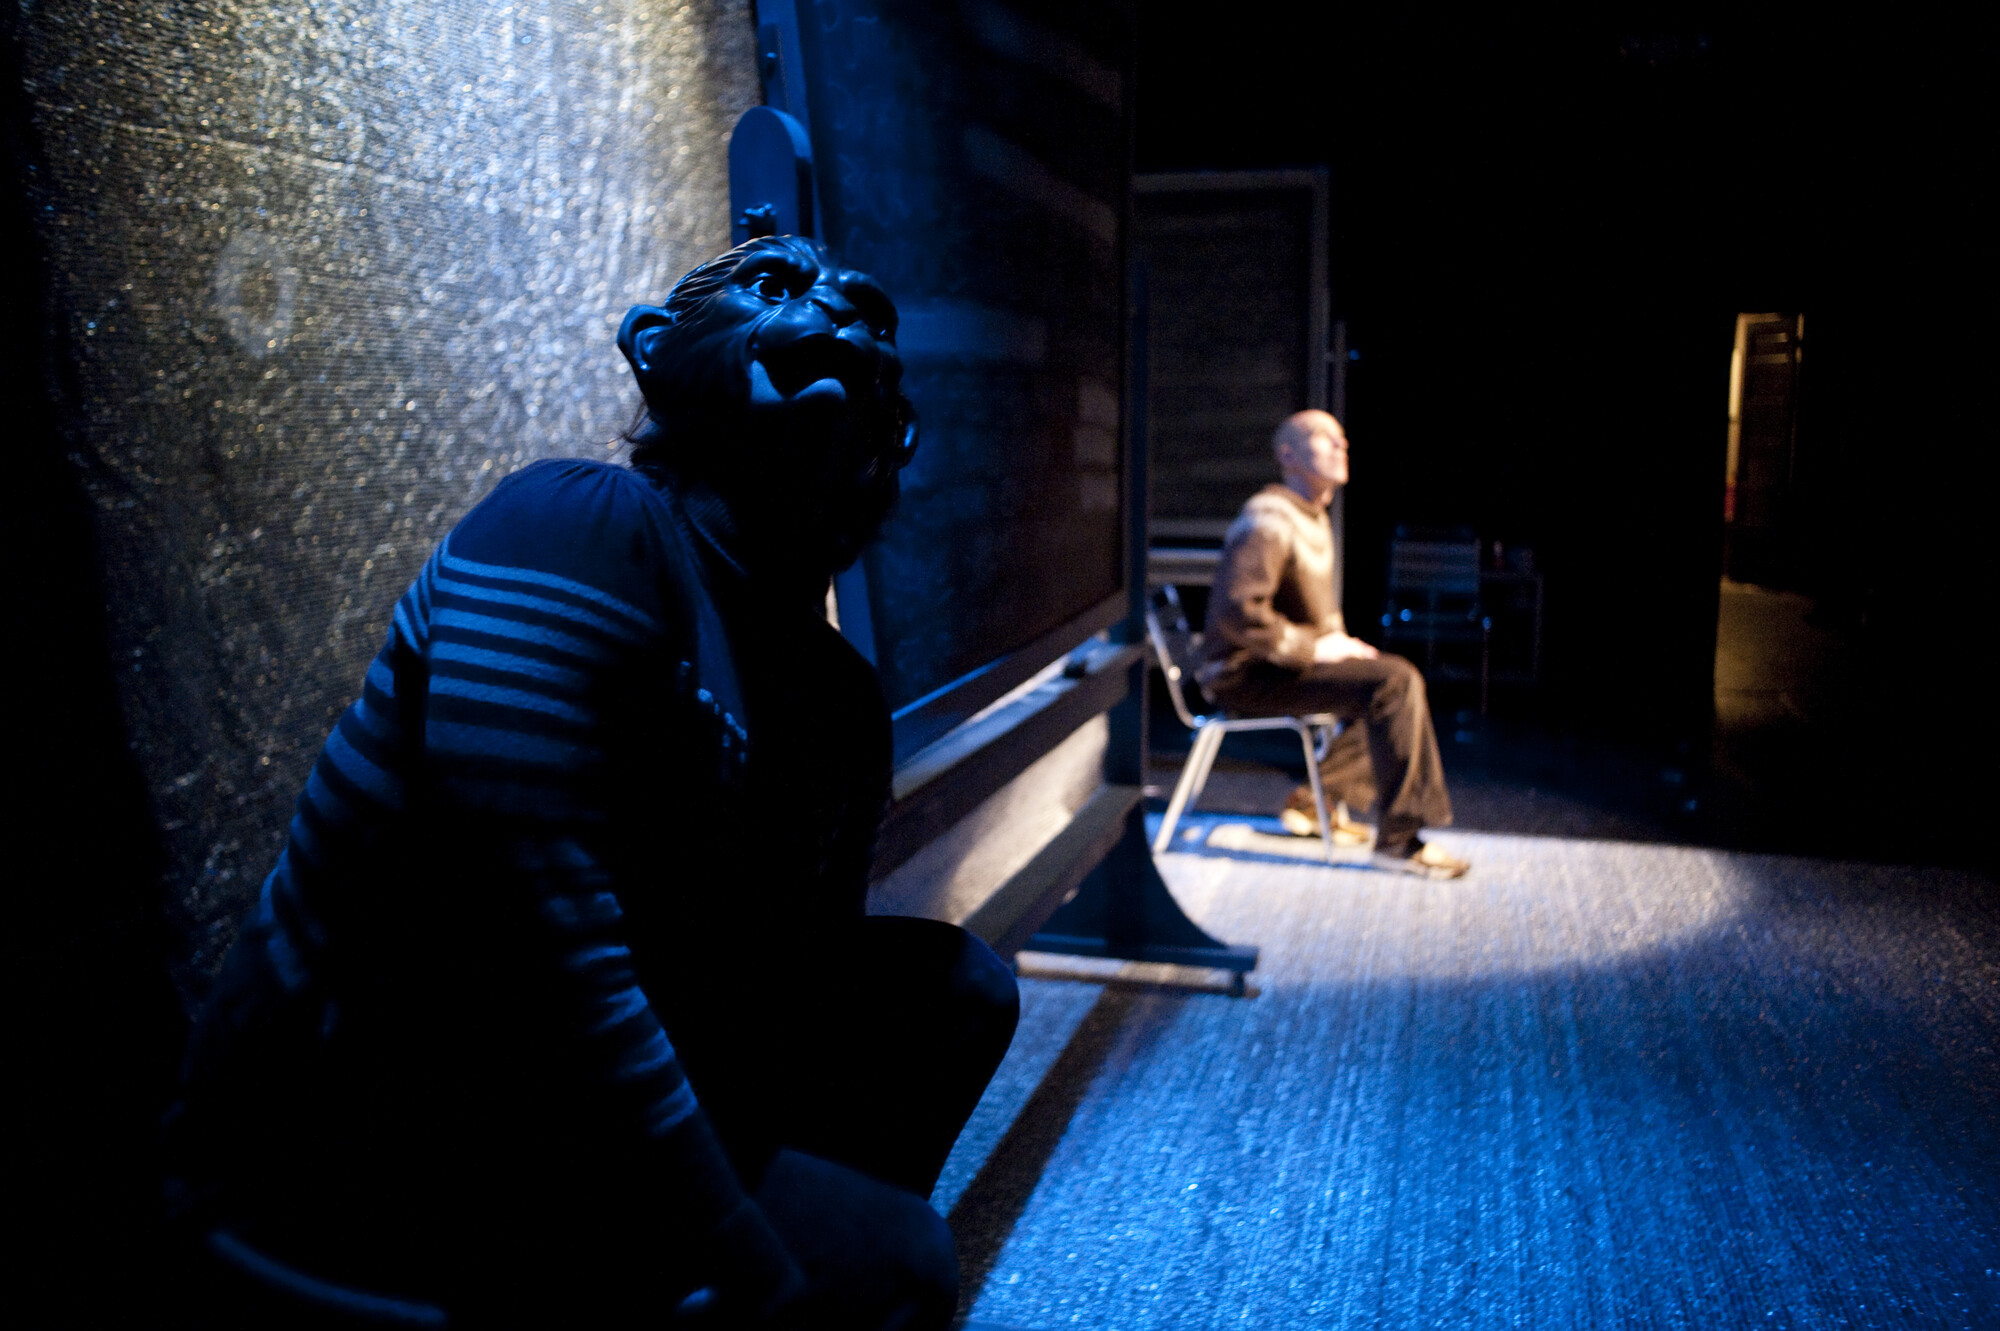 A performer in a monkey mask sits offstage while another performer sits under a spotlight on stage.